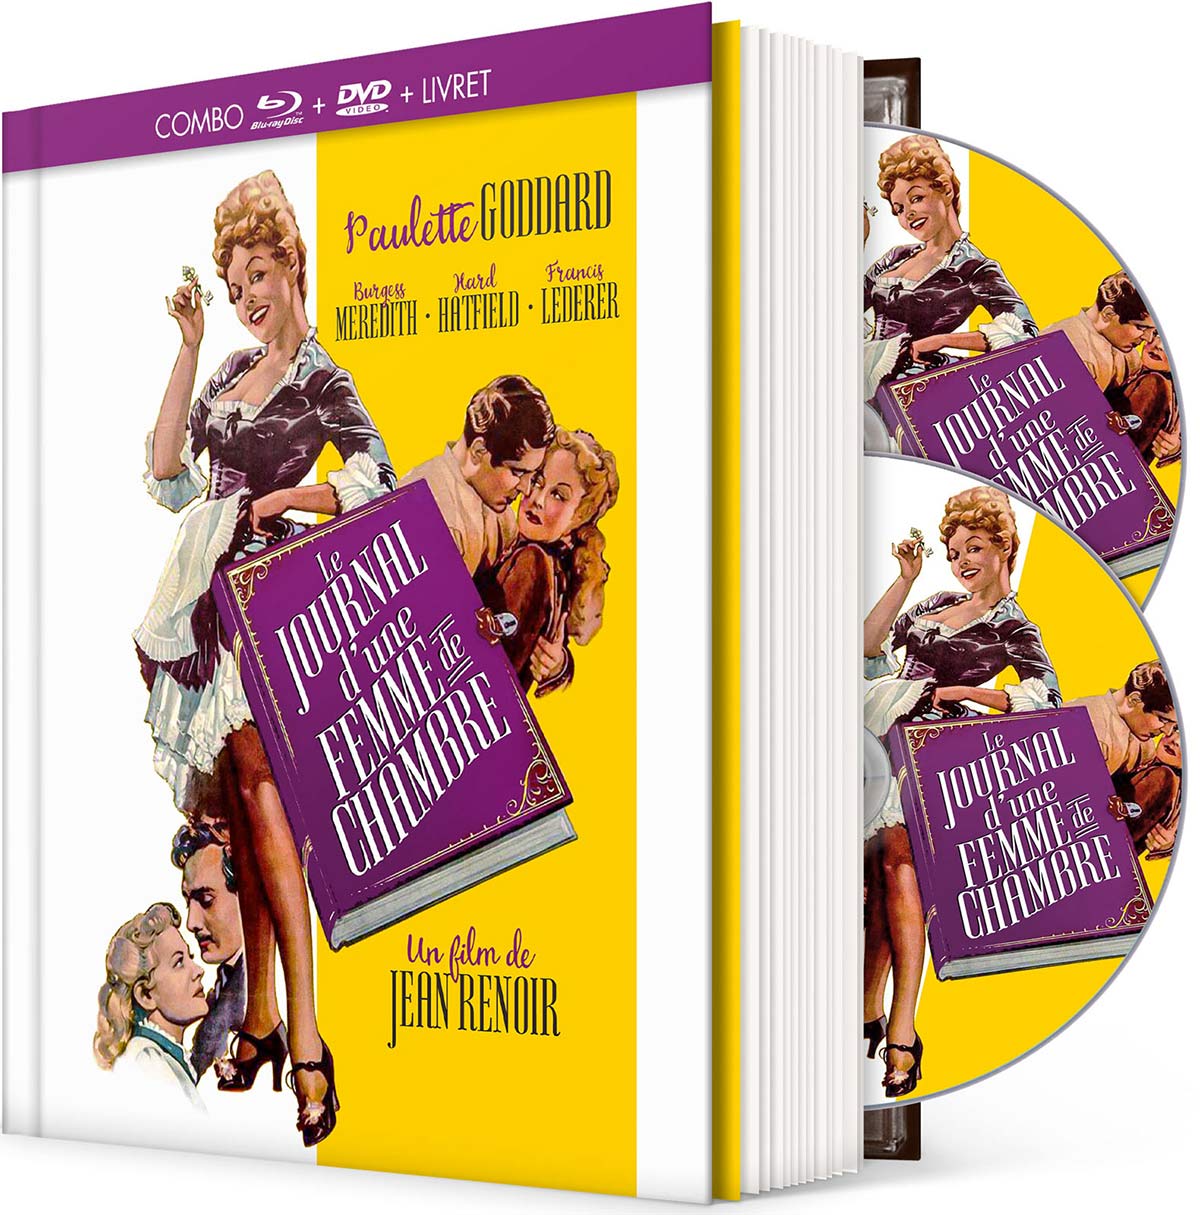 DVDFr - Le Maître des illusions (Lord of Illusions) (Combo Blu-ray